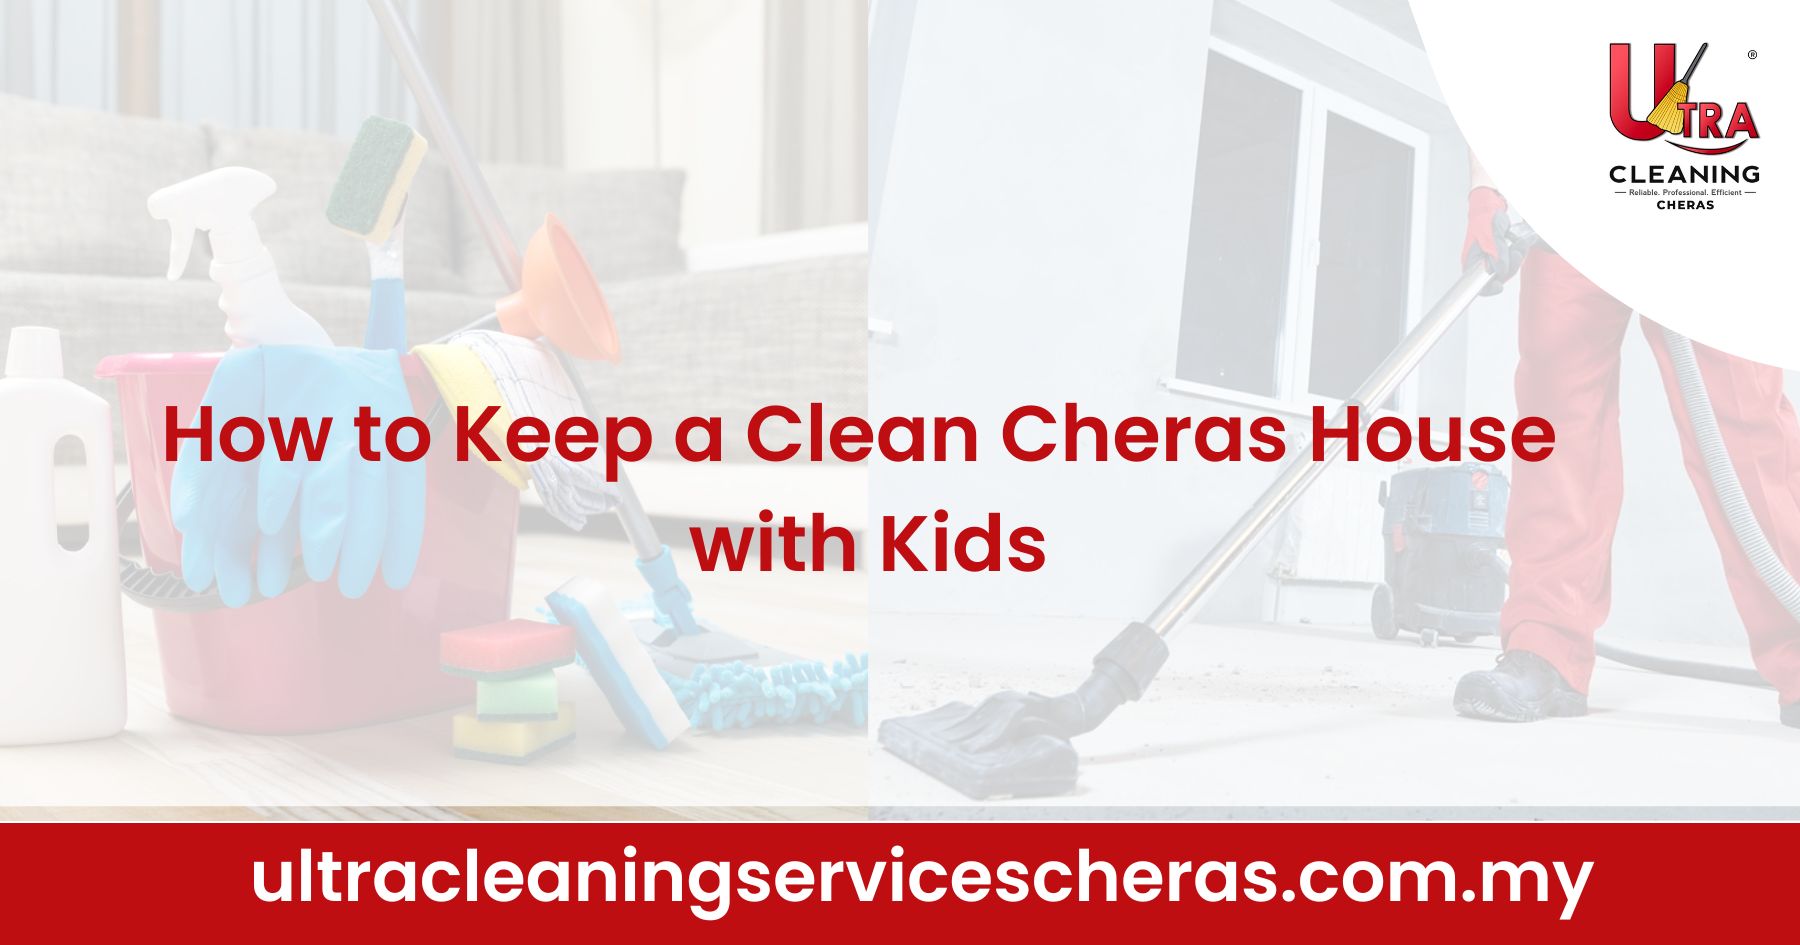 How to Keep a Clean Cheras House with Kids